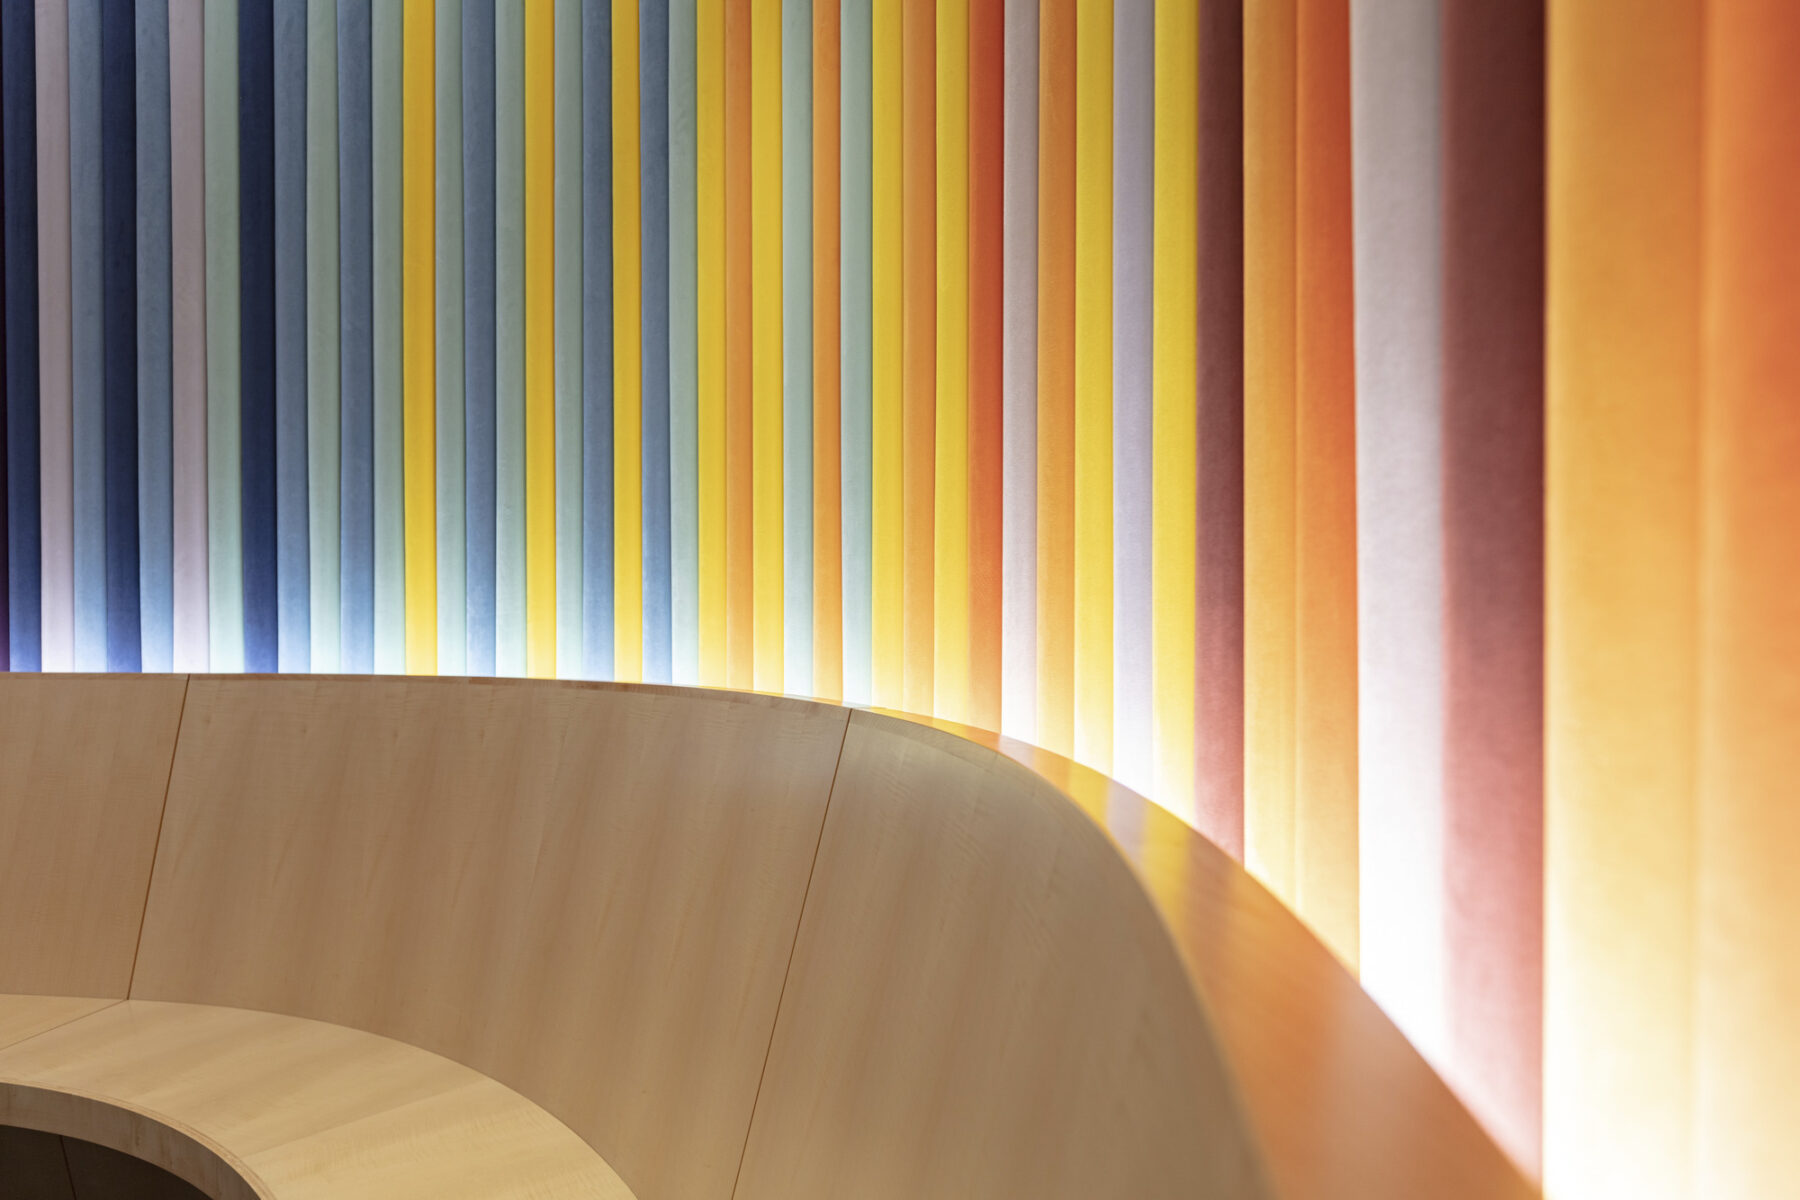 a close-up shot of the upholstered wall made up of vertical stripes ranging from blue to yellow, orange, and red.